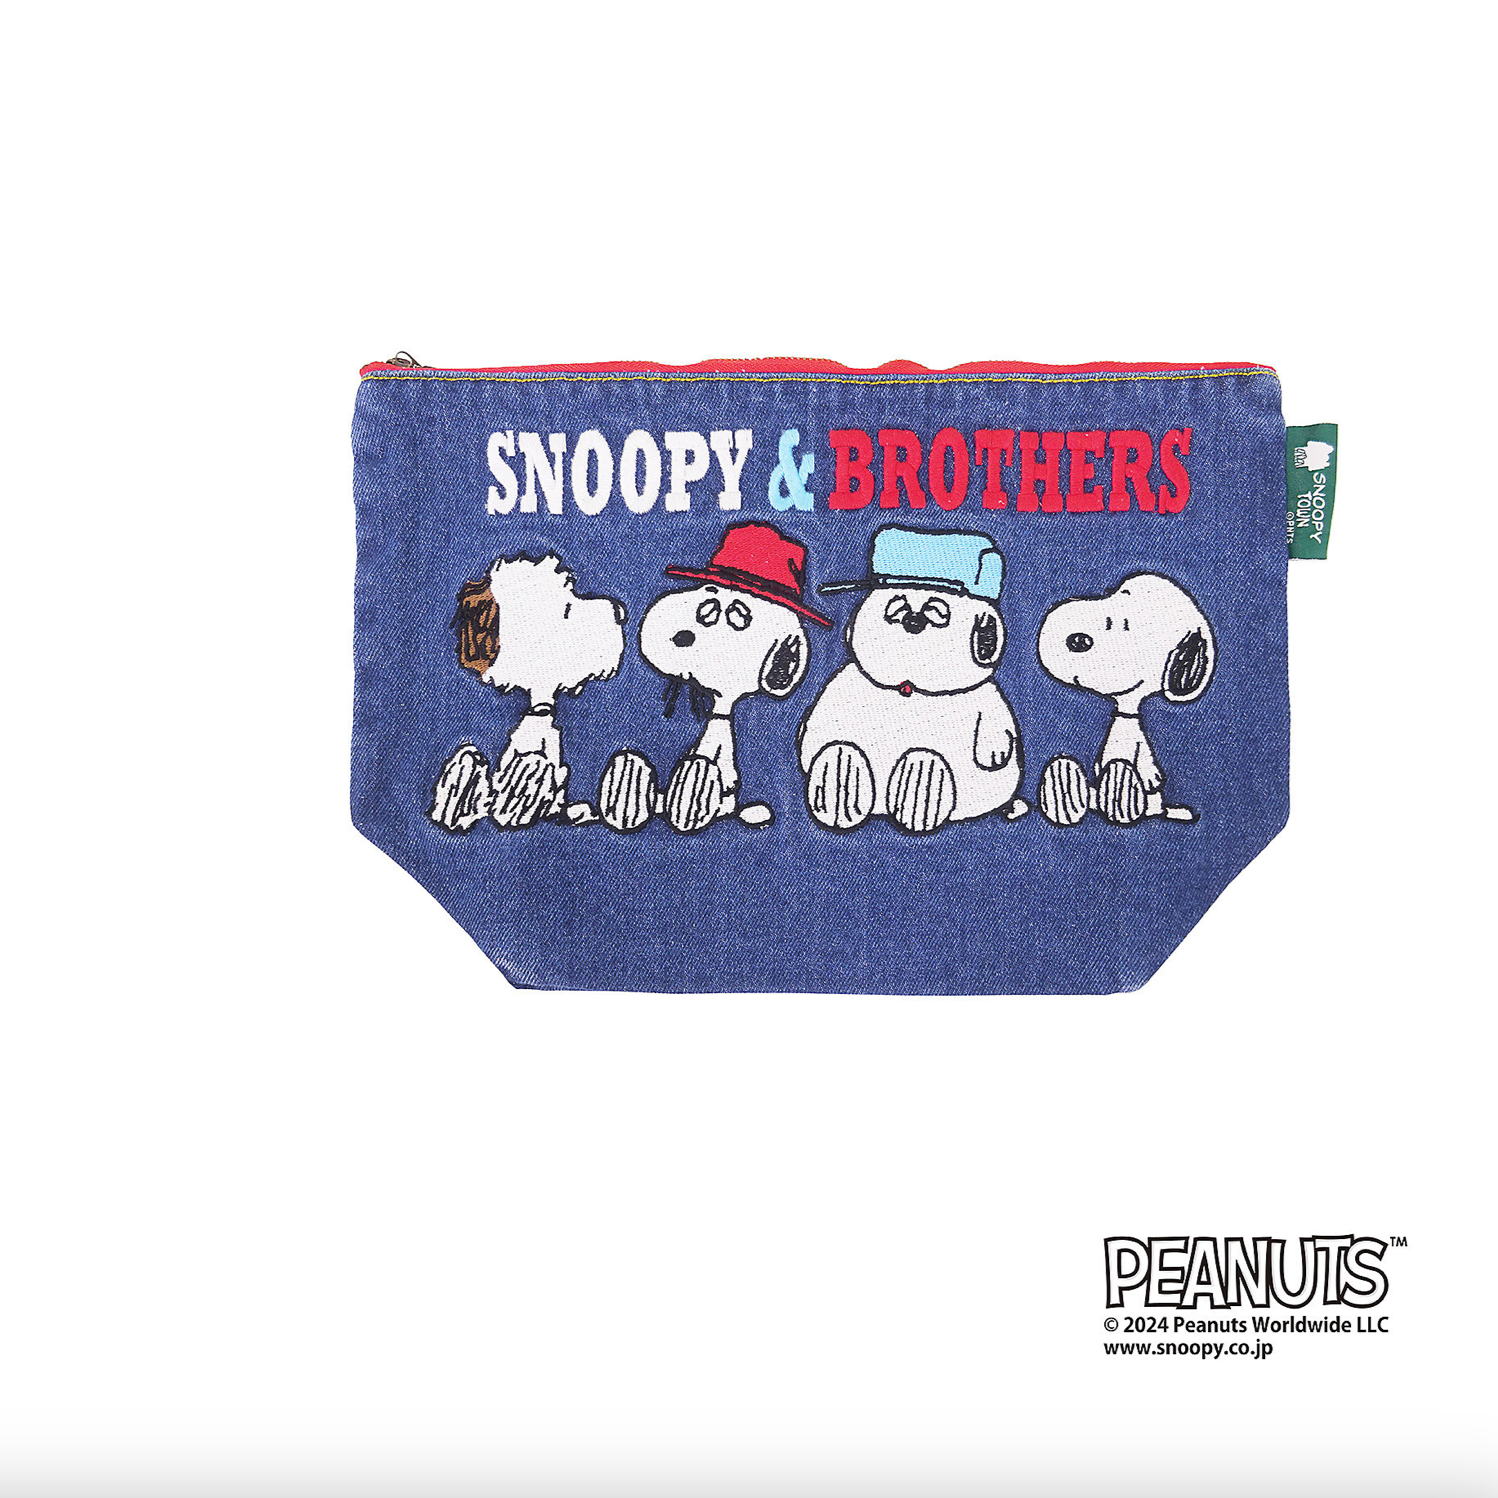 Snoopy & Brothers 牛仔布 Pouch